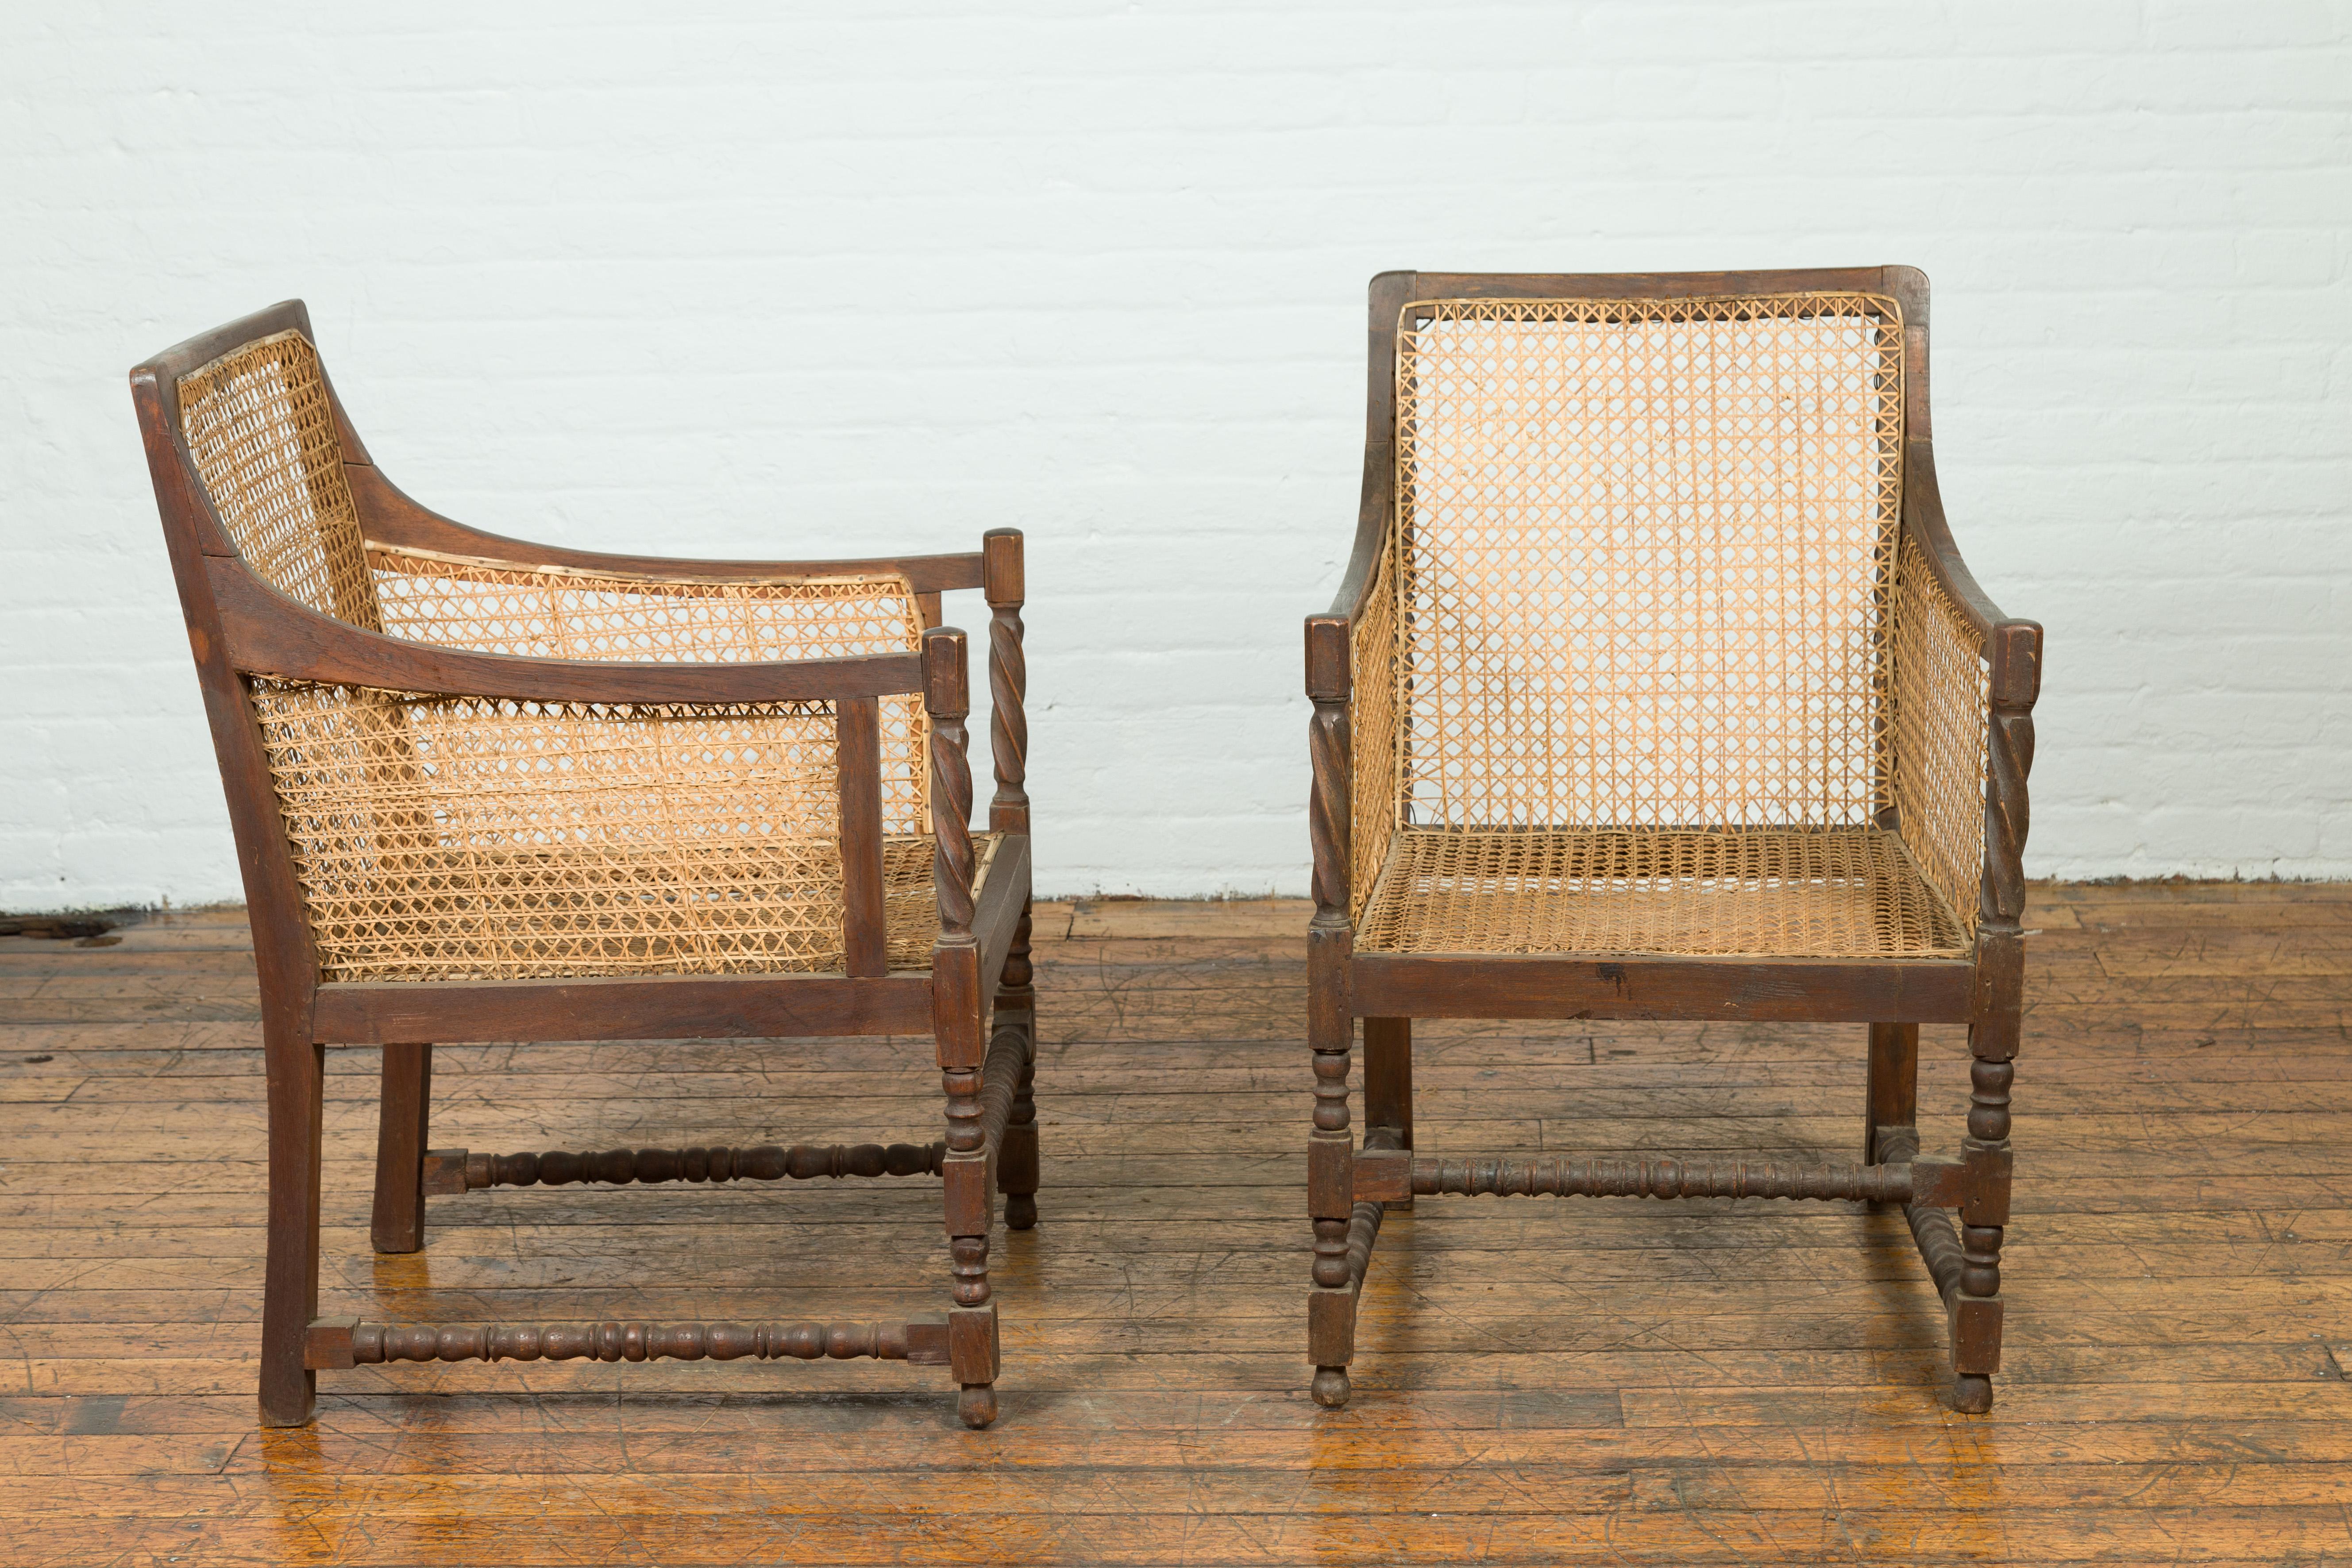 Pair of Antique Rustic Thai Turned Wood Armchairs with Rattan Backs and Seats 7